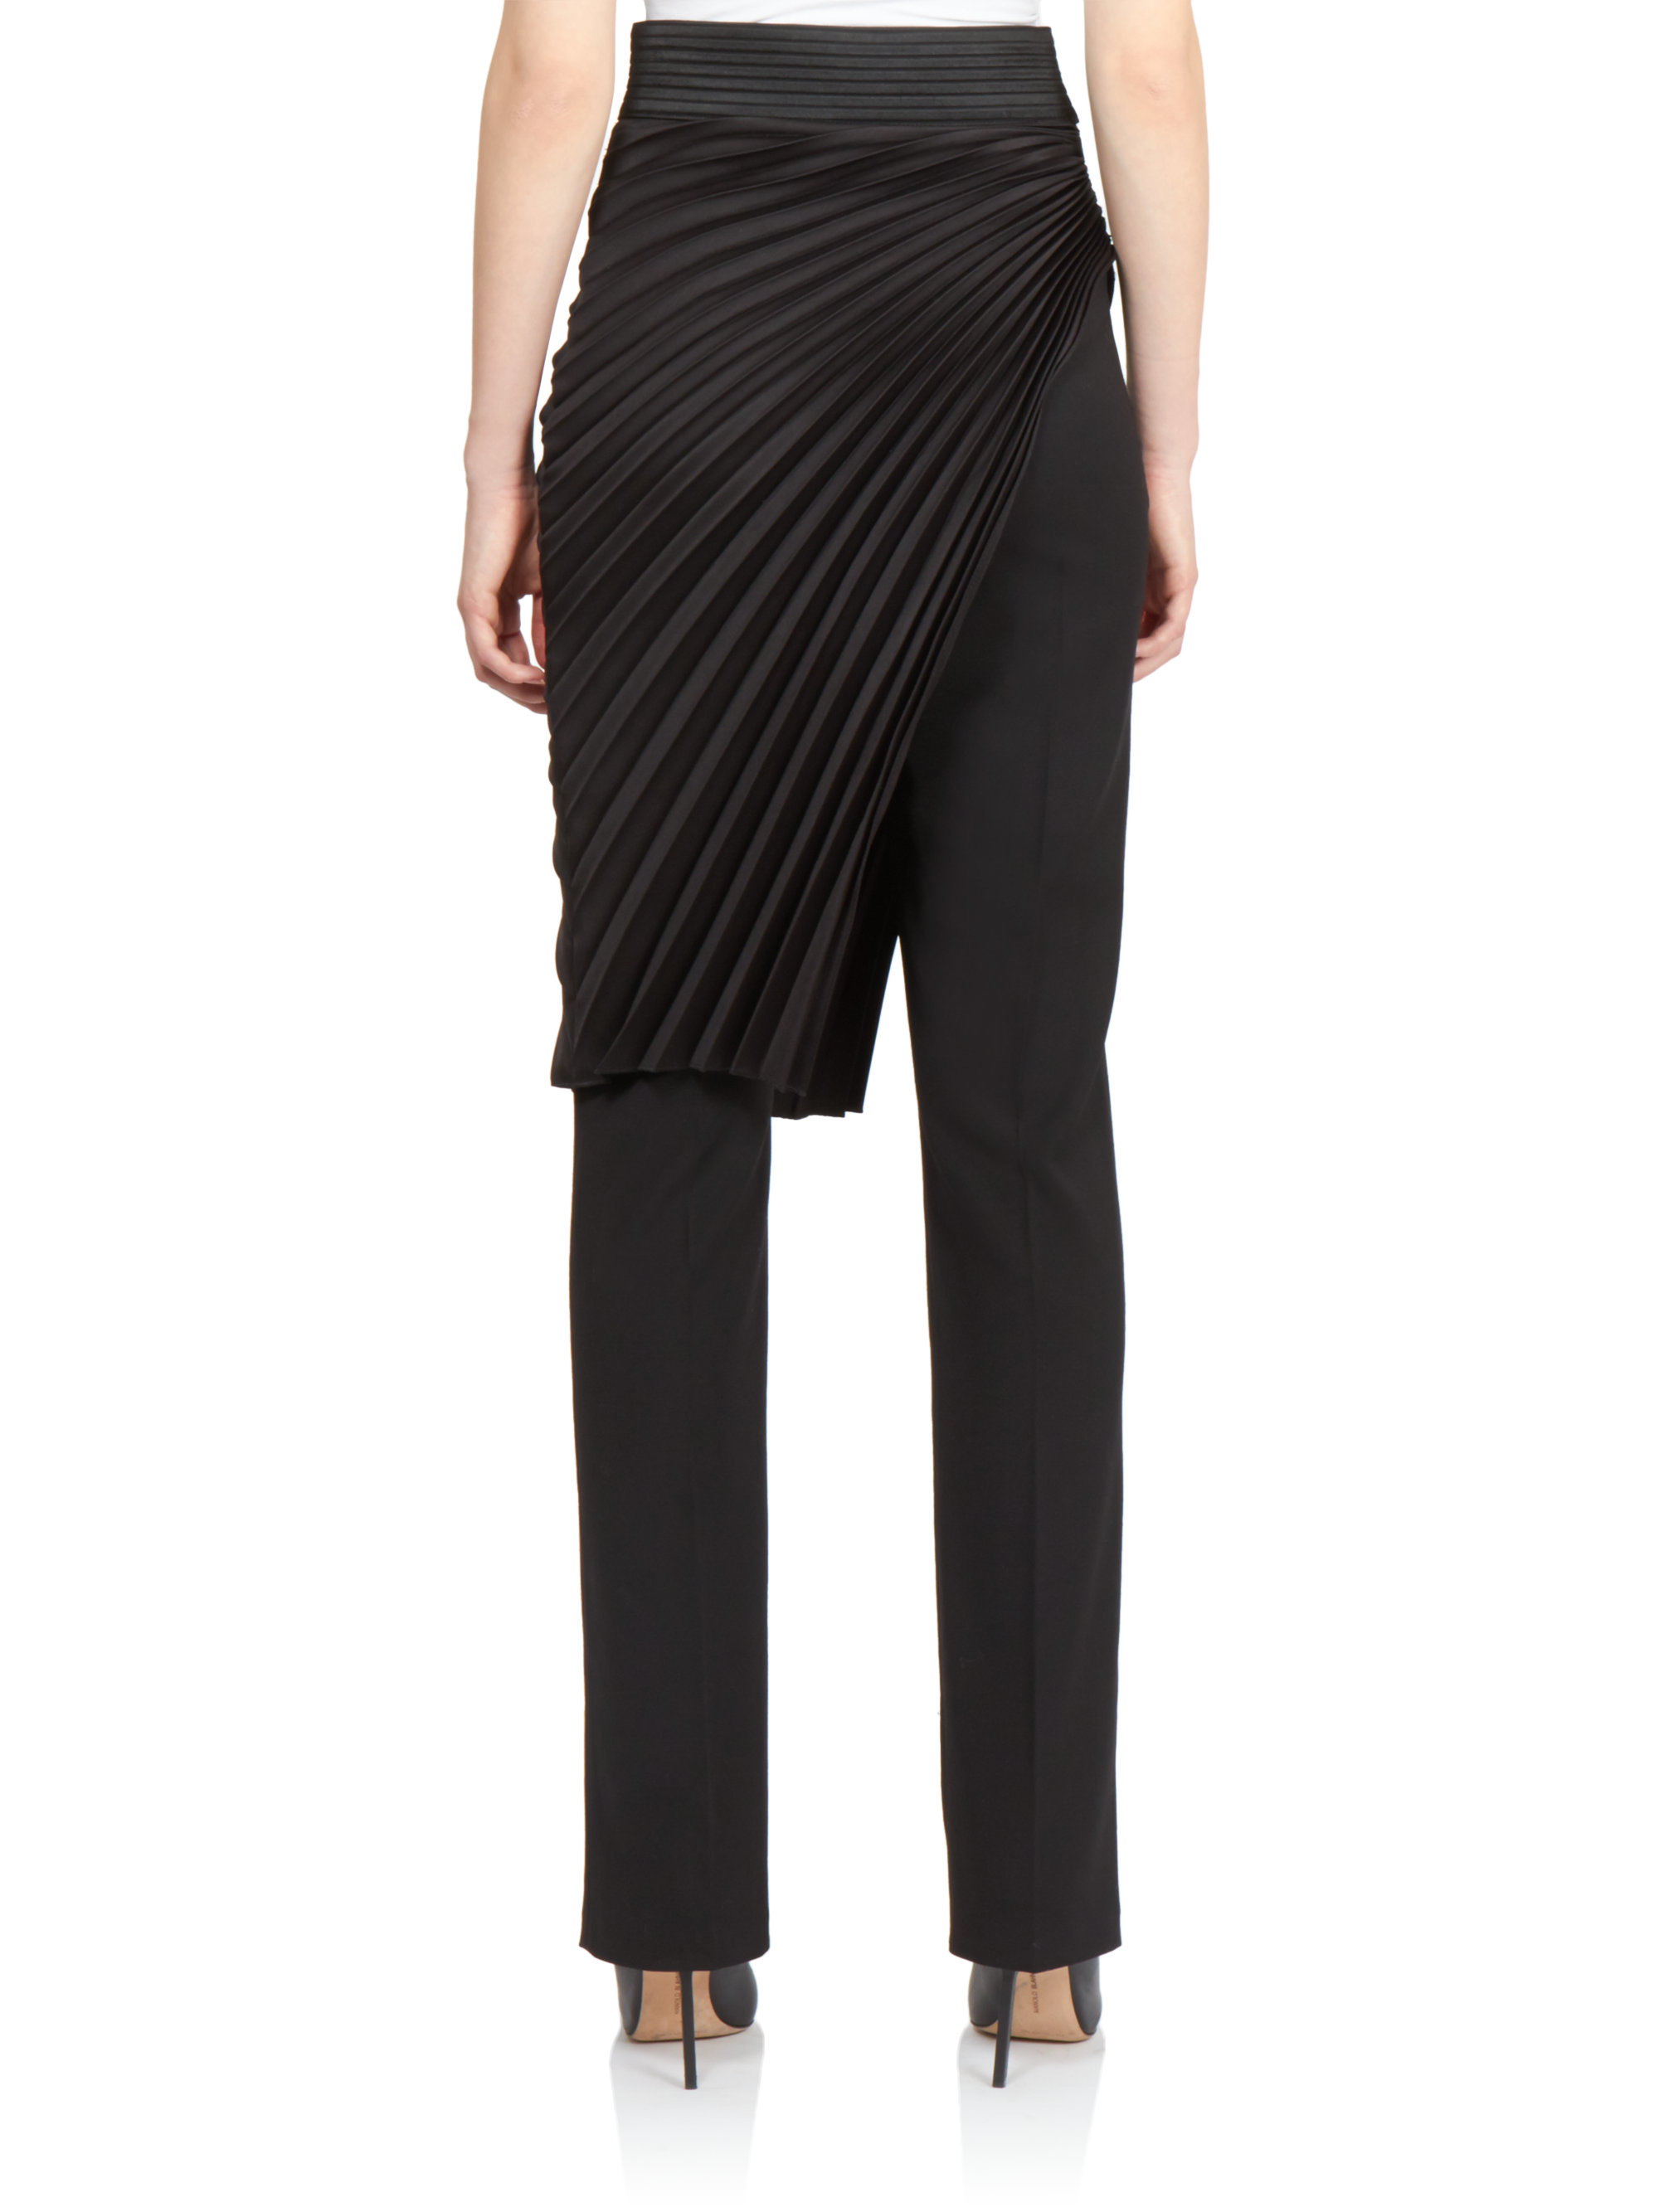 Emanuel ungaro Skirt Overlay Stretch Wool Trousers in Black | Lyst